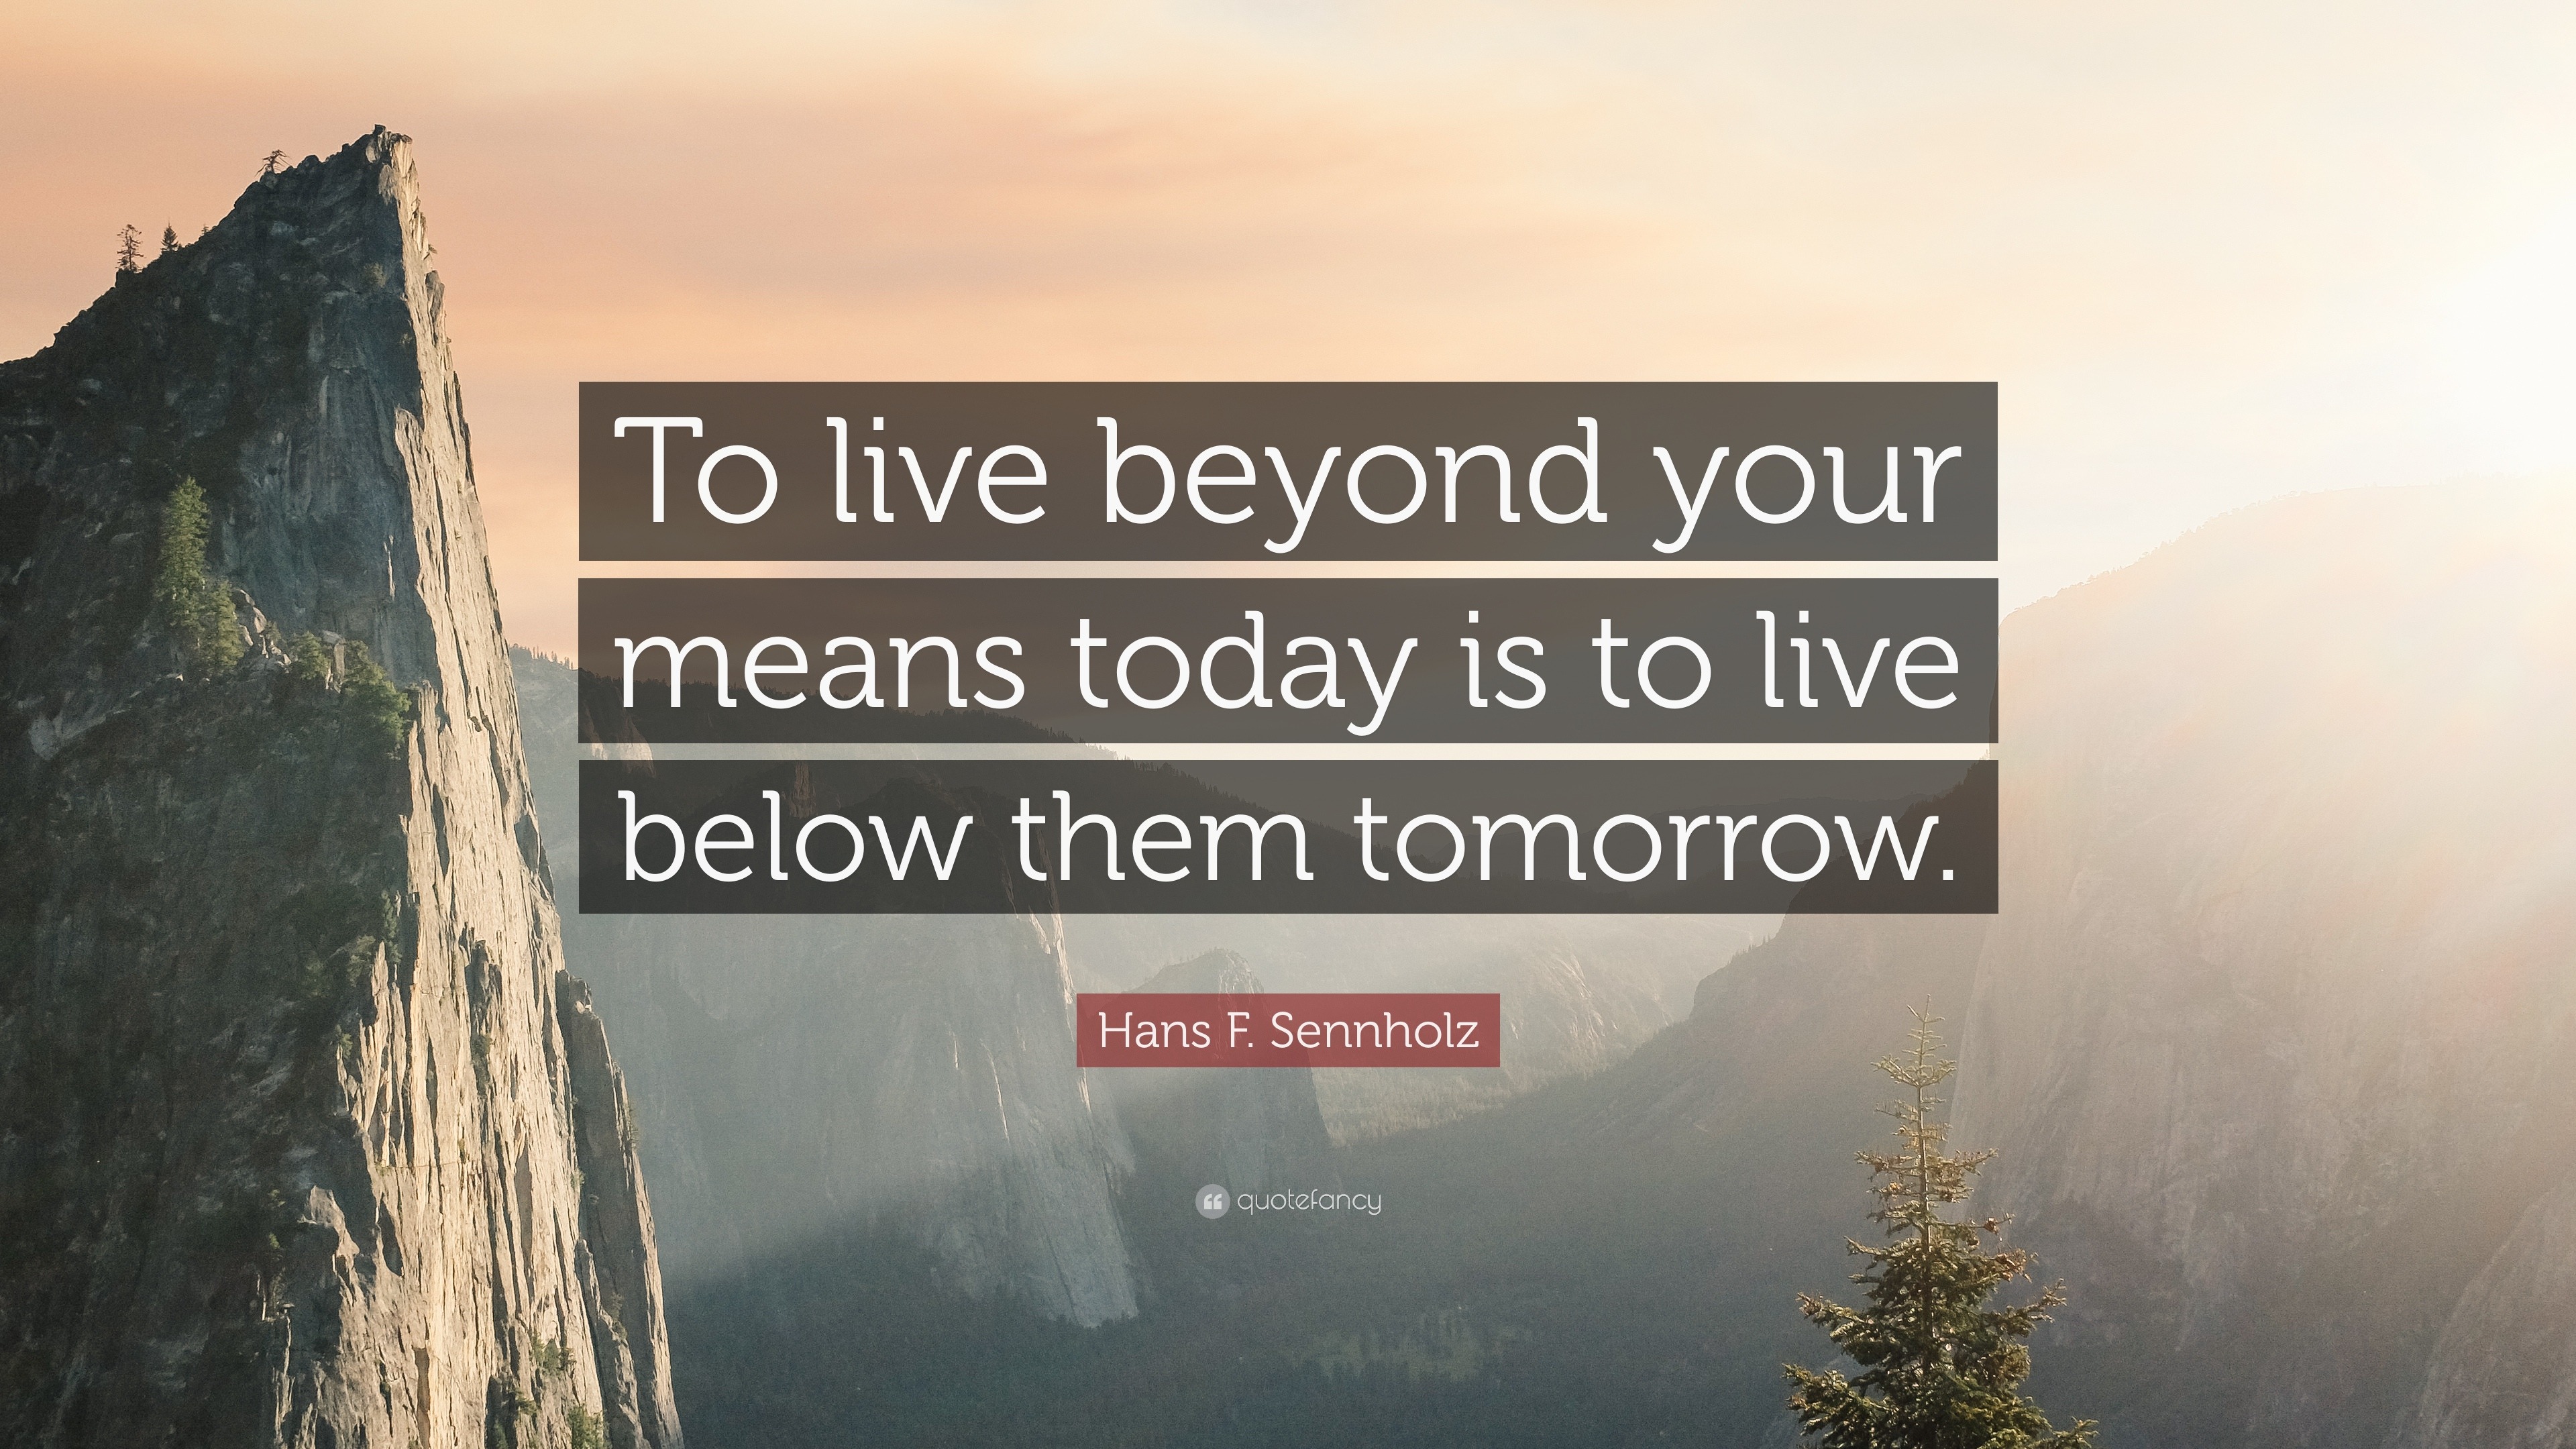 Hans F. Sennholz Quote “To live beyond your means today is to live